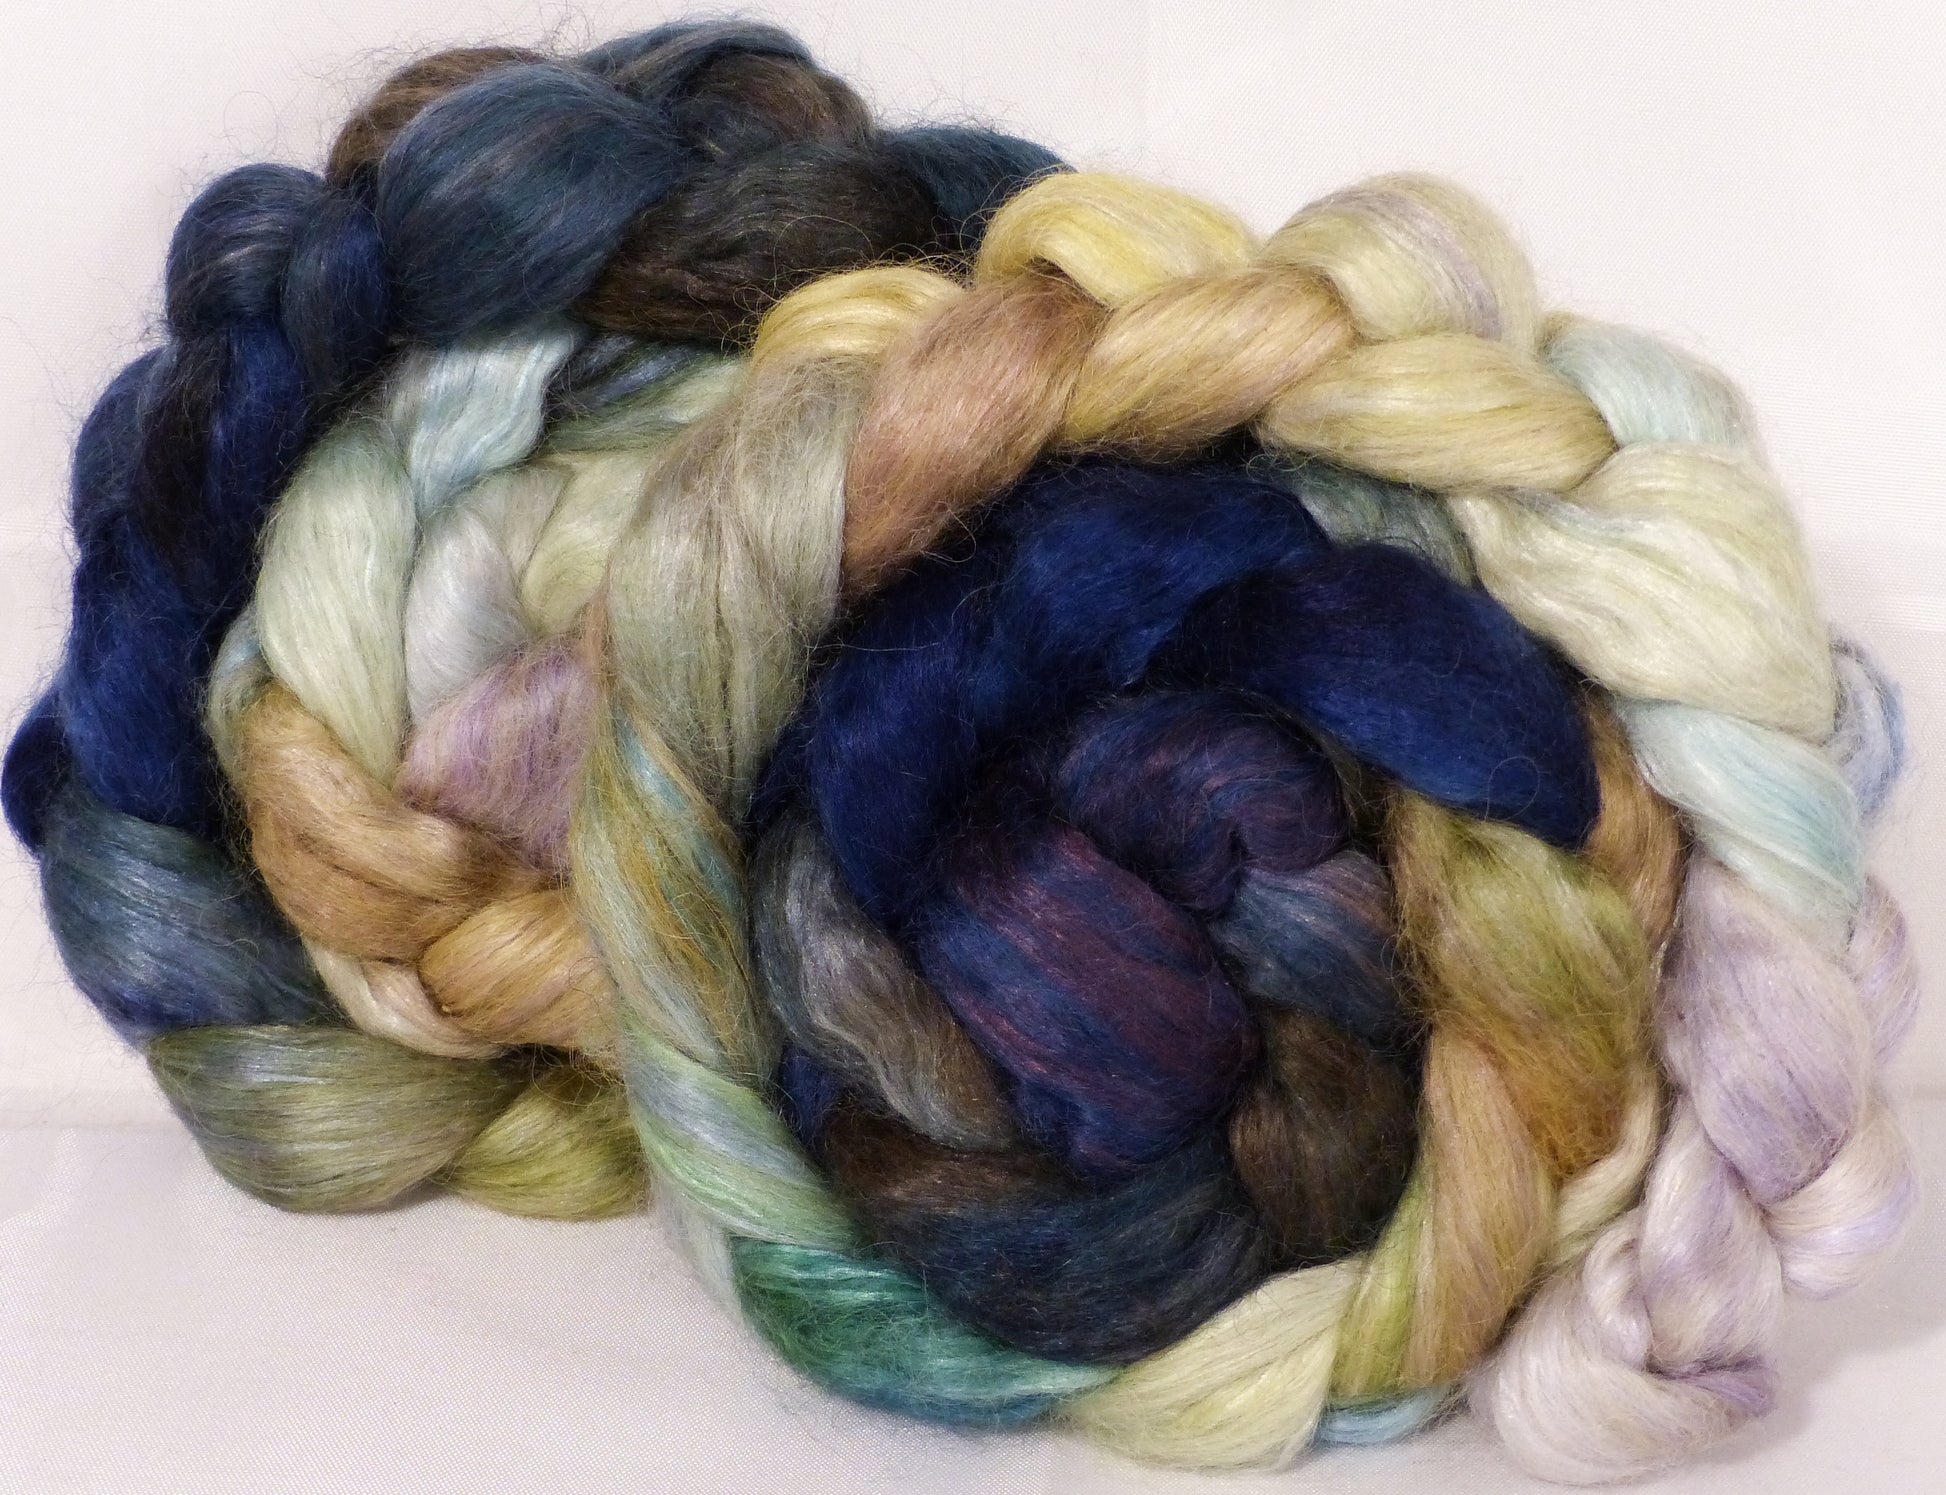 Hand-dyed wensleydale/ mulberry silk roving ( 65/35) -Downpour- ( 5.1 oz.) - Inglenook Fibers